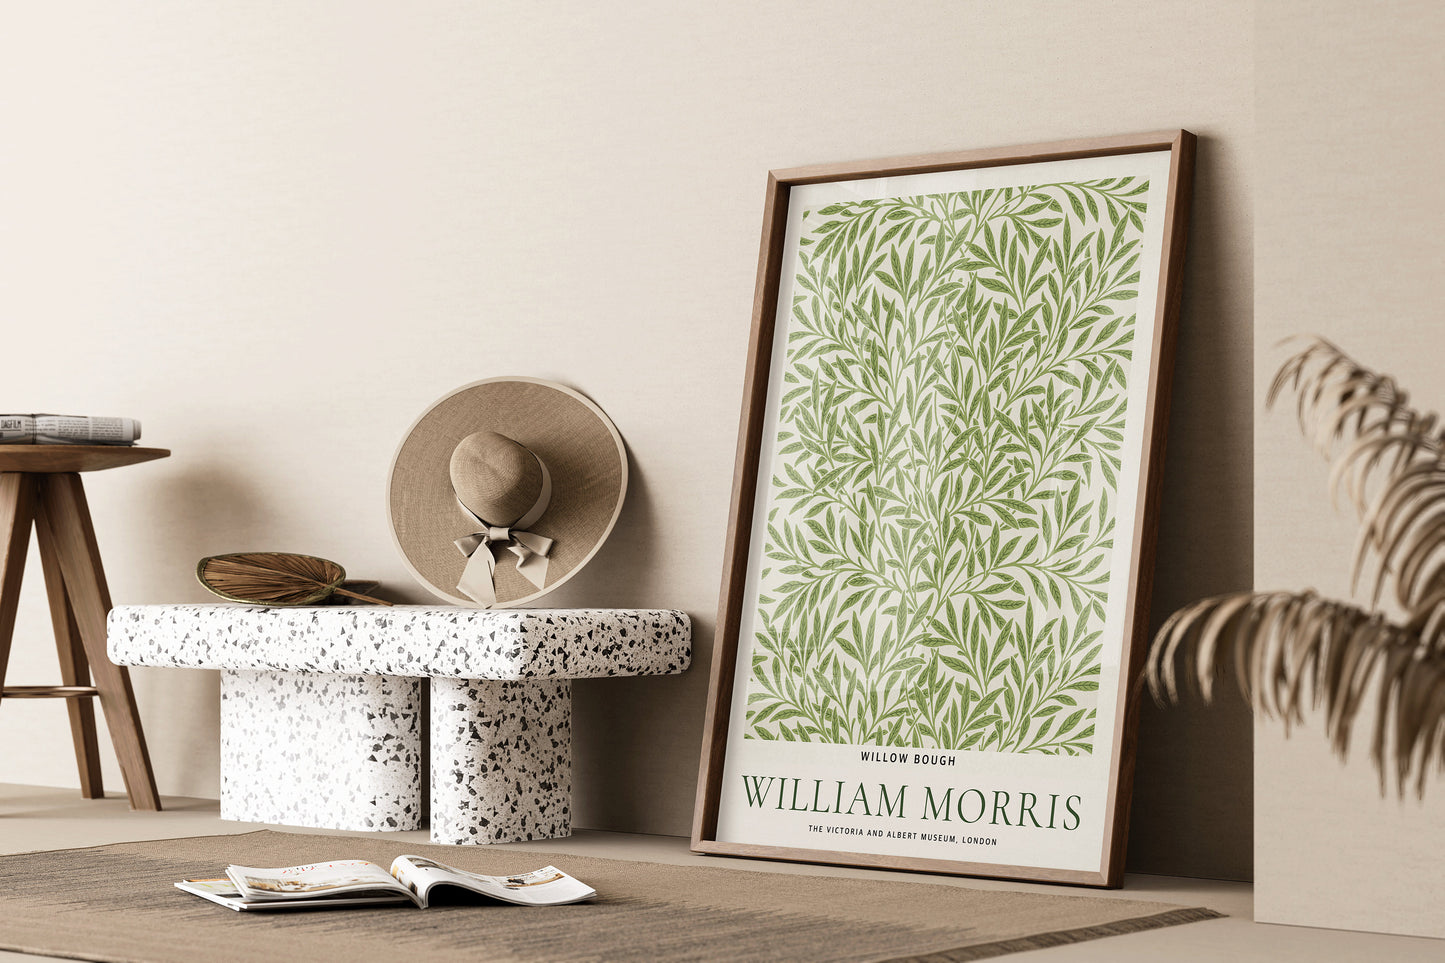 William Morris Willow Bough Poster Exhibition Museum Art Print Nouveau Morris Flower Market Ready to hang Framed Home Office Decor Gift Idea